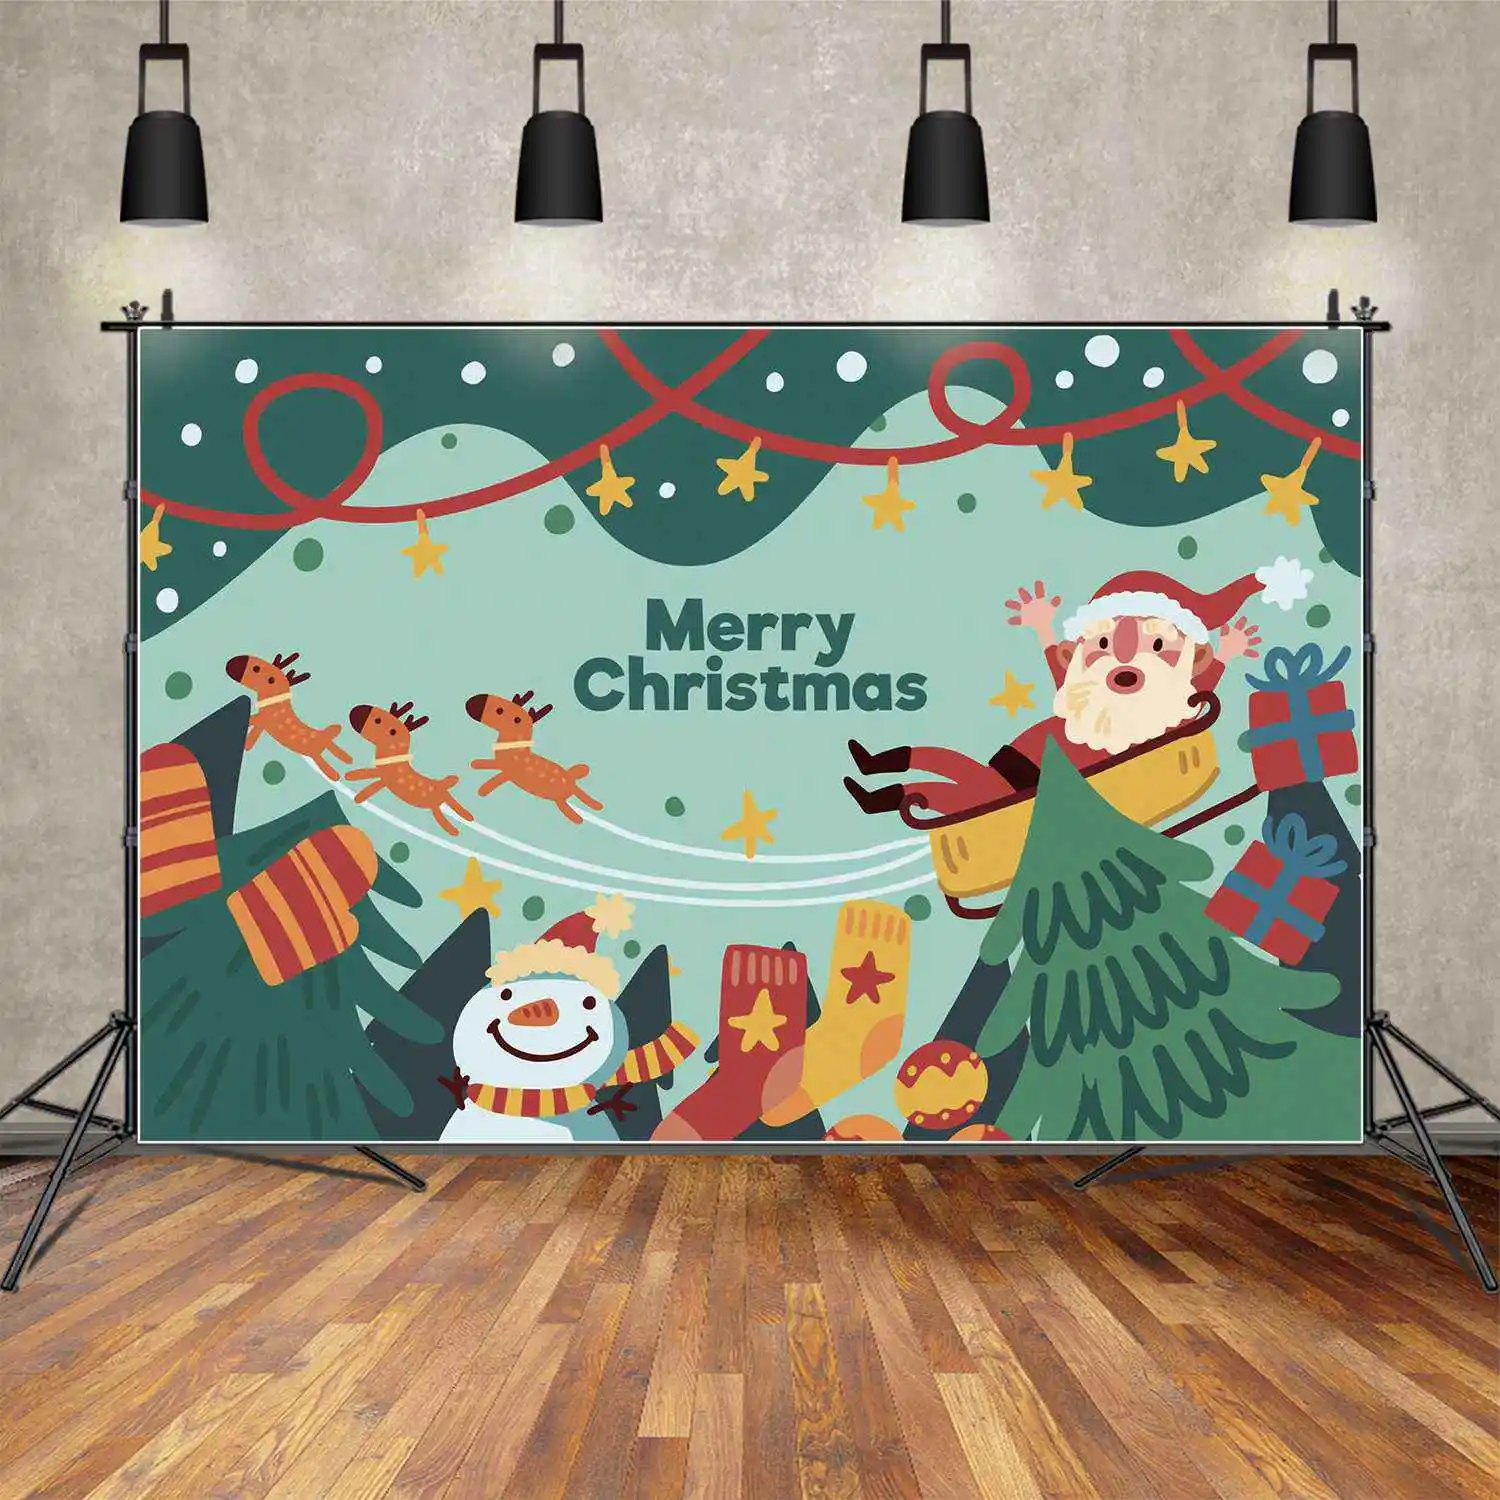 

MOON.QG Backdrop Merry Christmas Banner Santa Claus Reindeer Baby Party Photo Booth Background Green Mountain Pine Snowman Decor